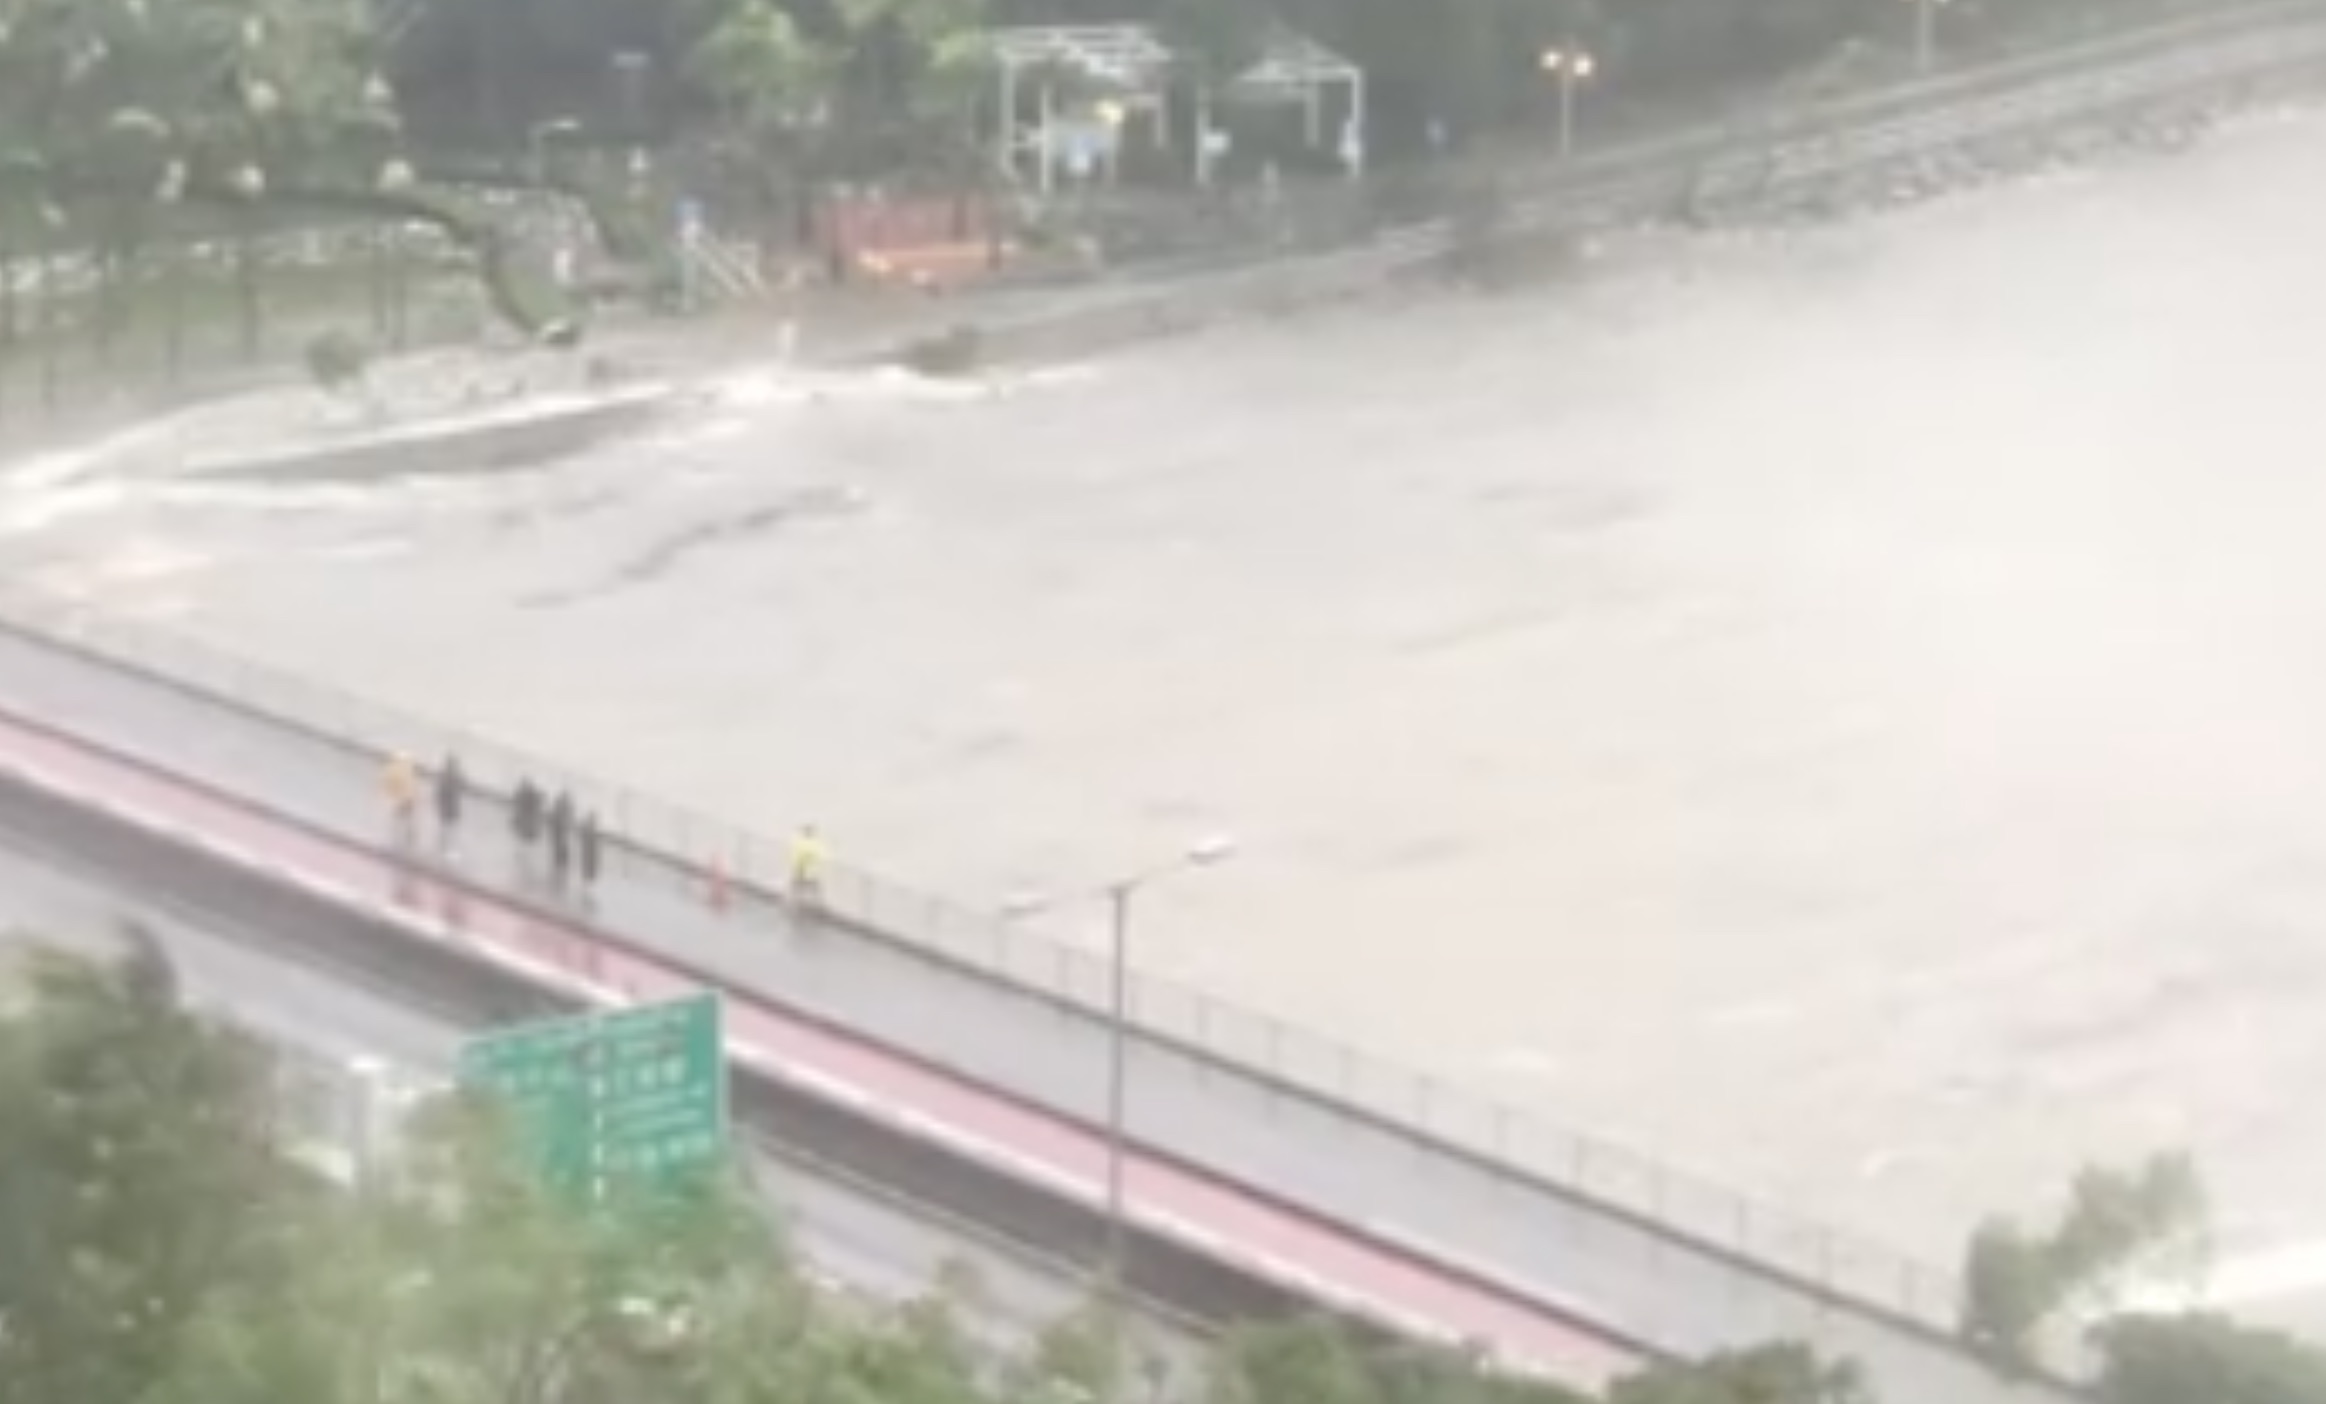 Taking photos at Tai Po Waterfront park mid typhoon. Via screengrab of video posted by Milk Sh Li on Facebook